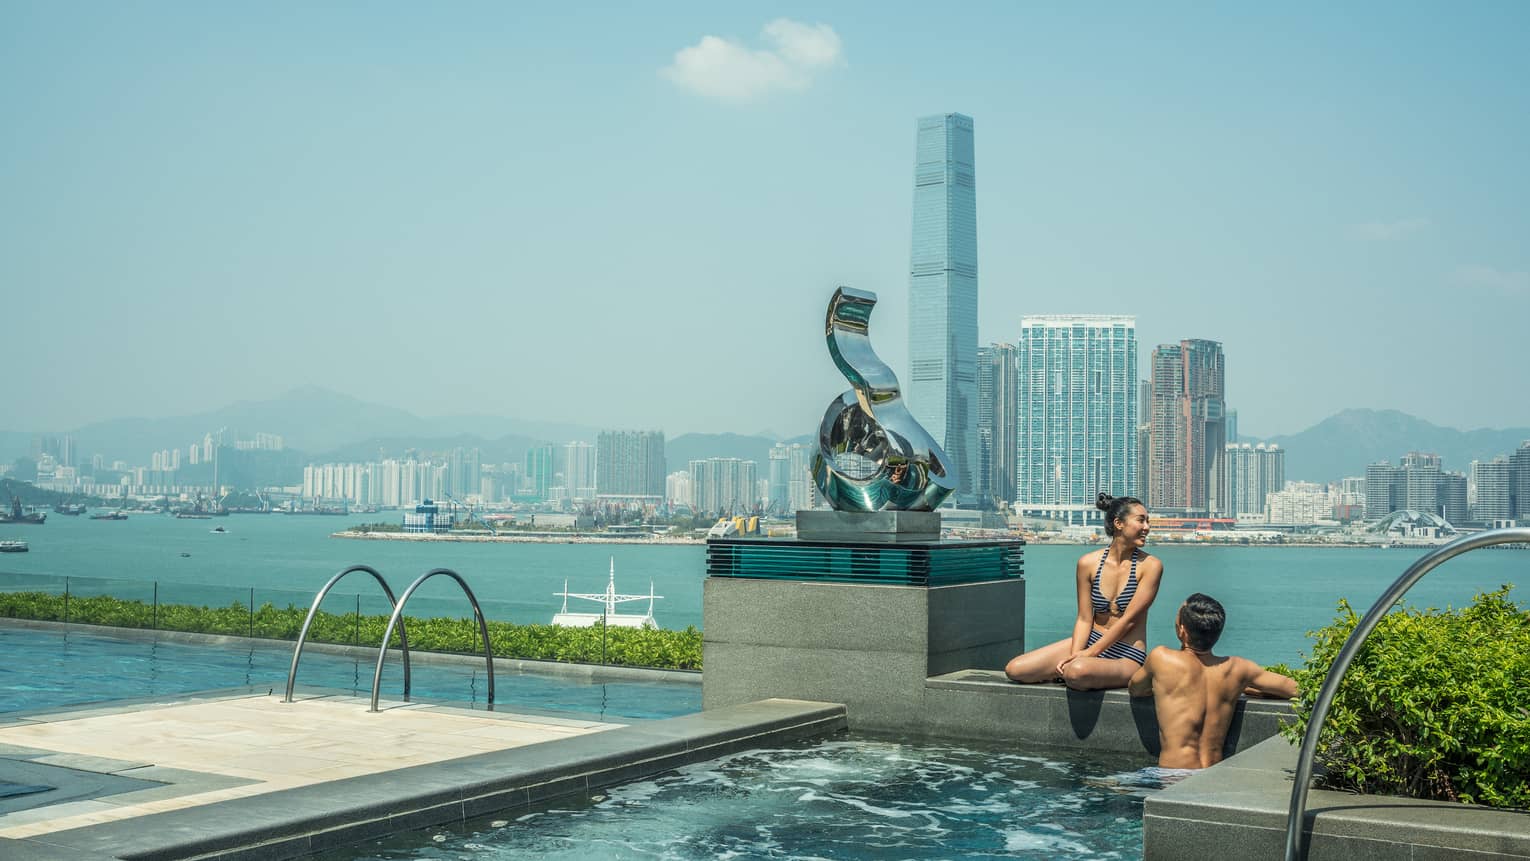 Couple wearing swimsuits wade at edge of outdoor swimming pool with sculpture, overlooking city